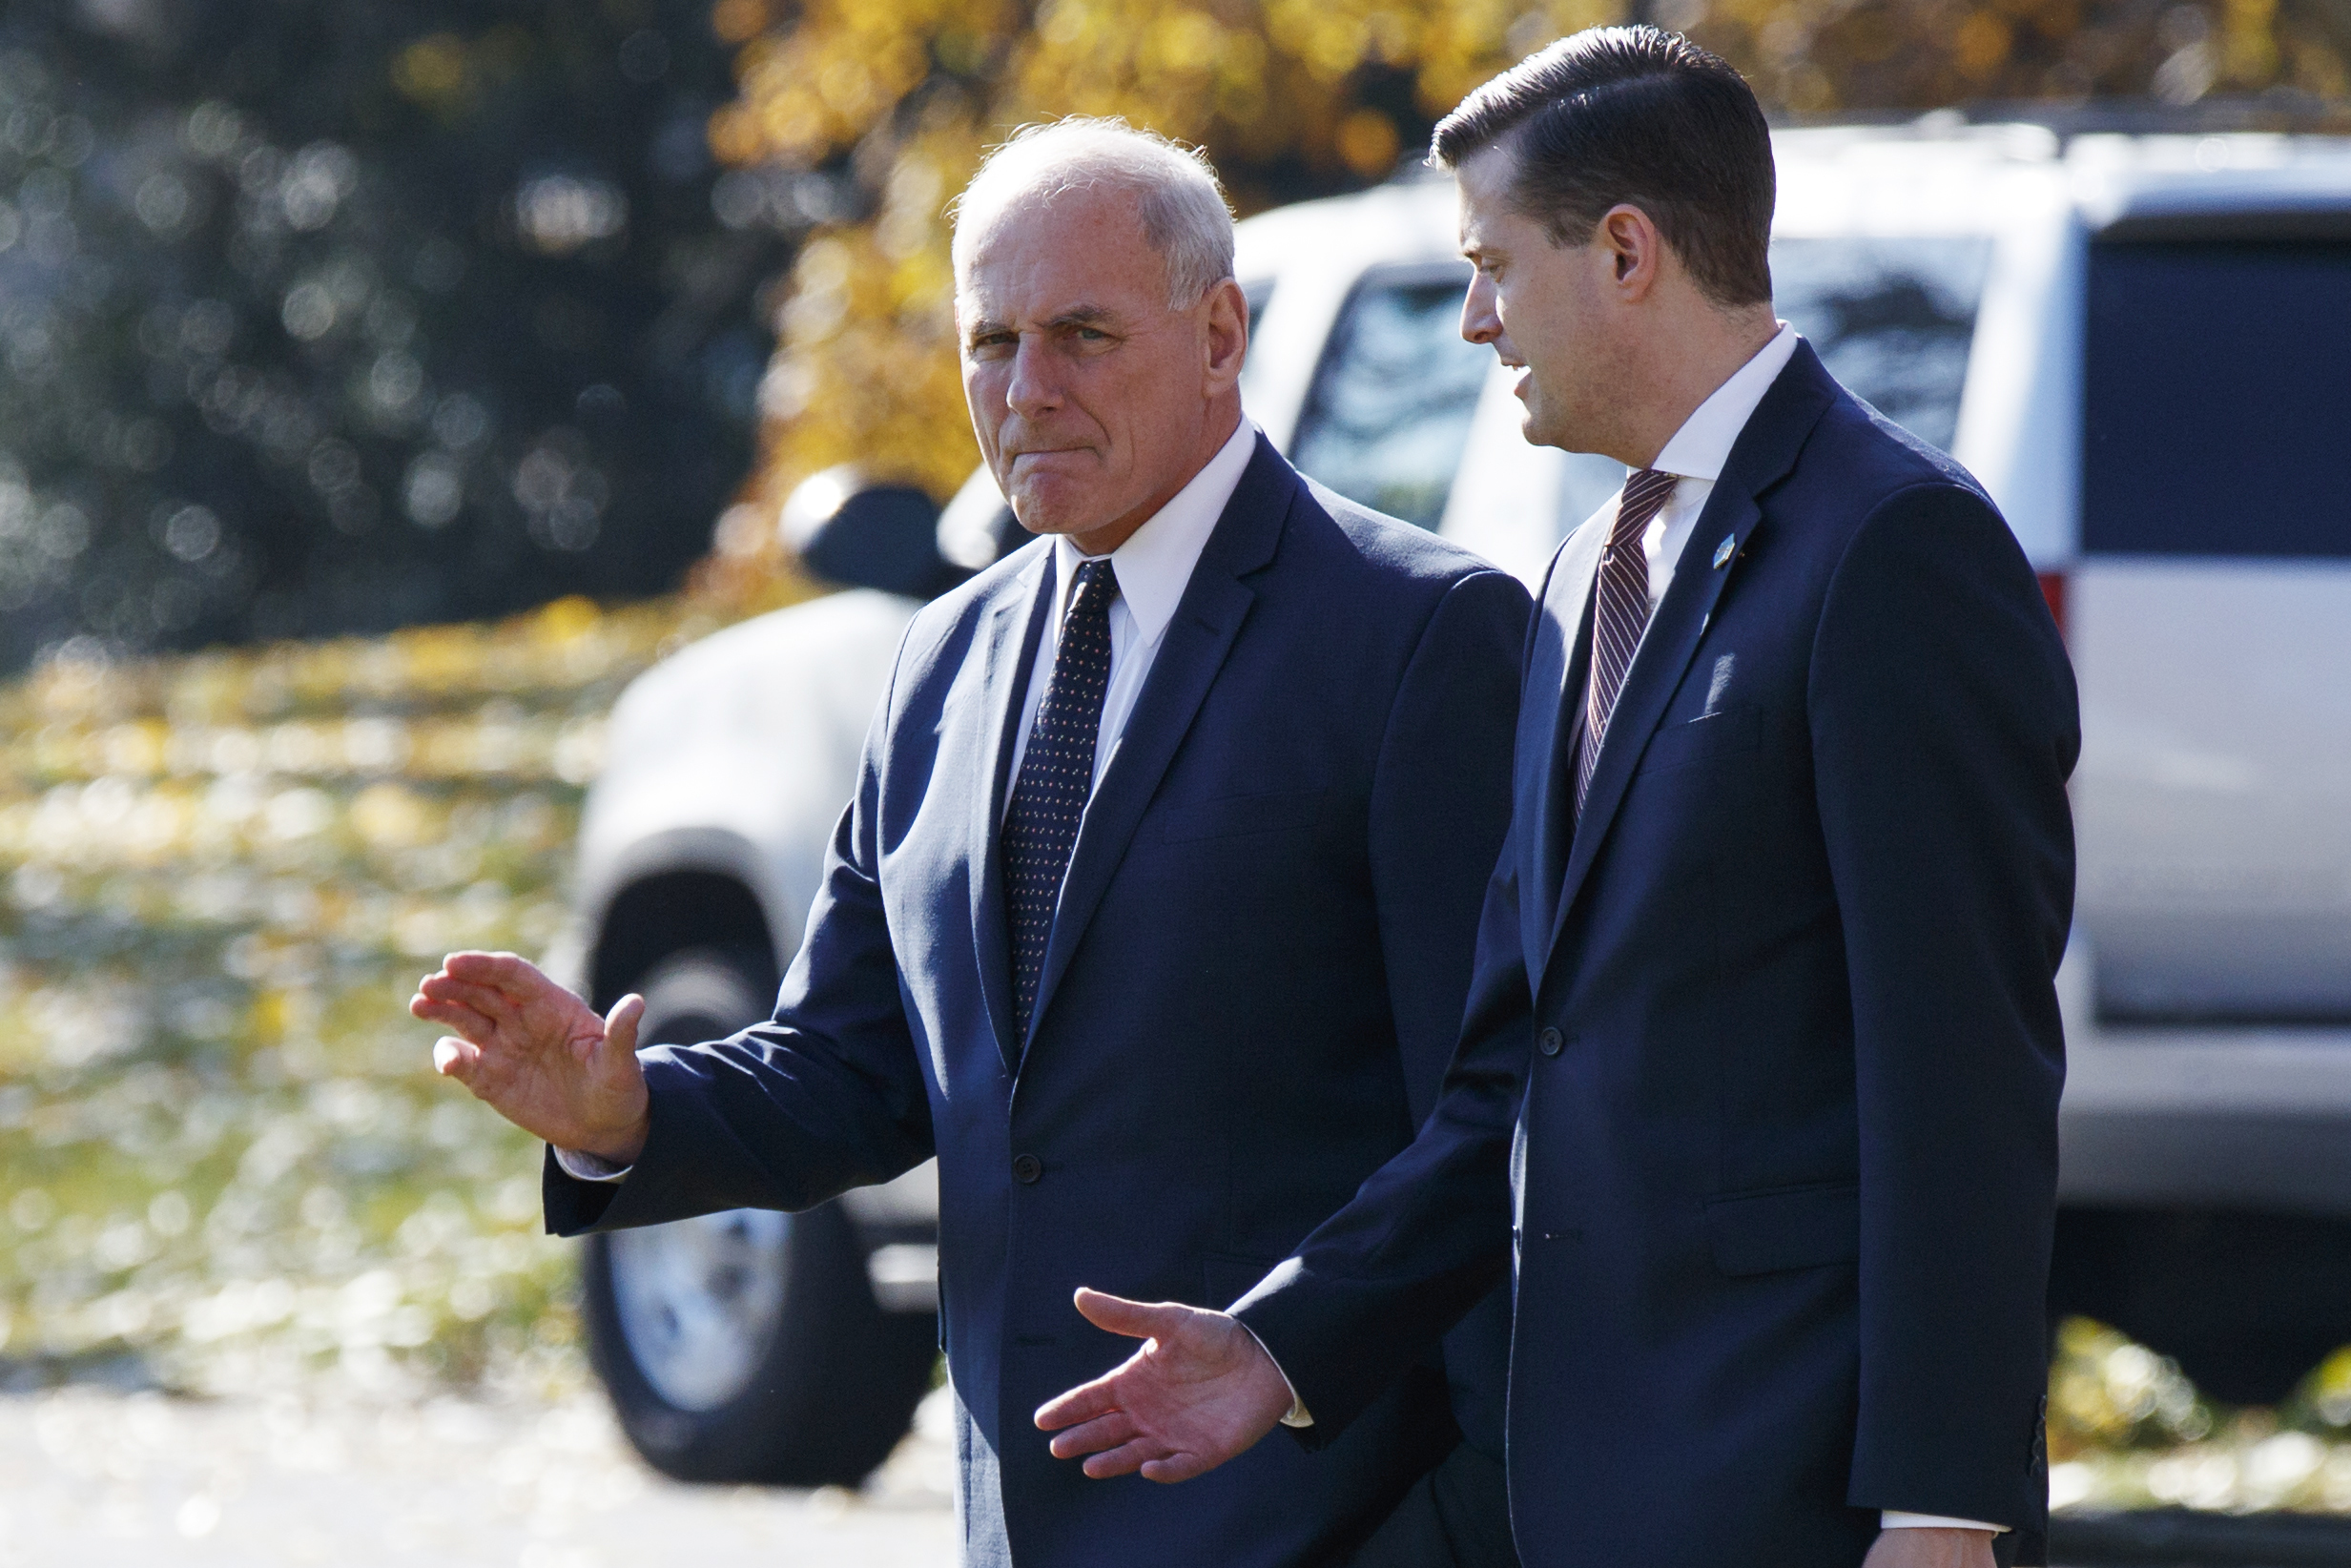 PHOTO: White House Chief of Staff John Kelly walks with White House staff secretary Rob Porter to board Marine One on the South Lawn of the White House in Washington, Nov. 29, 2017.